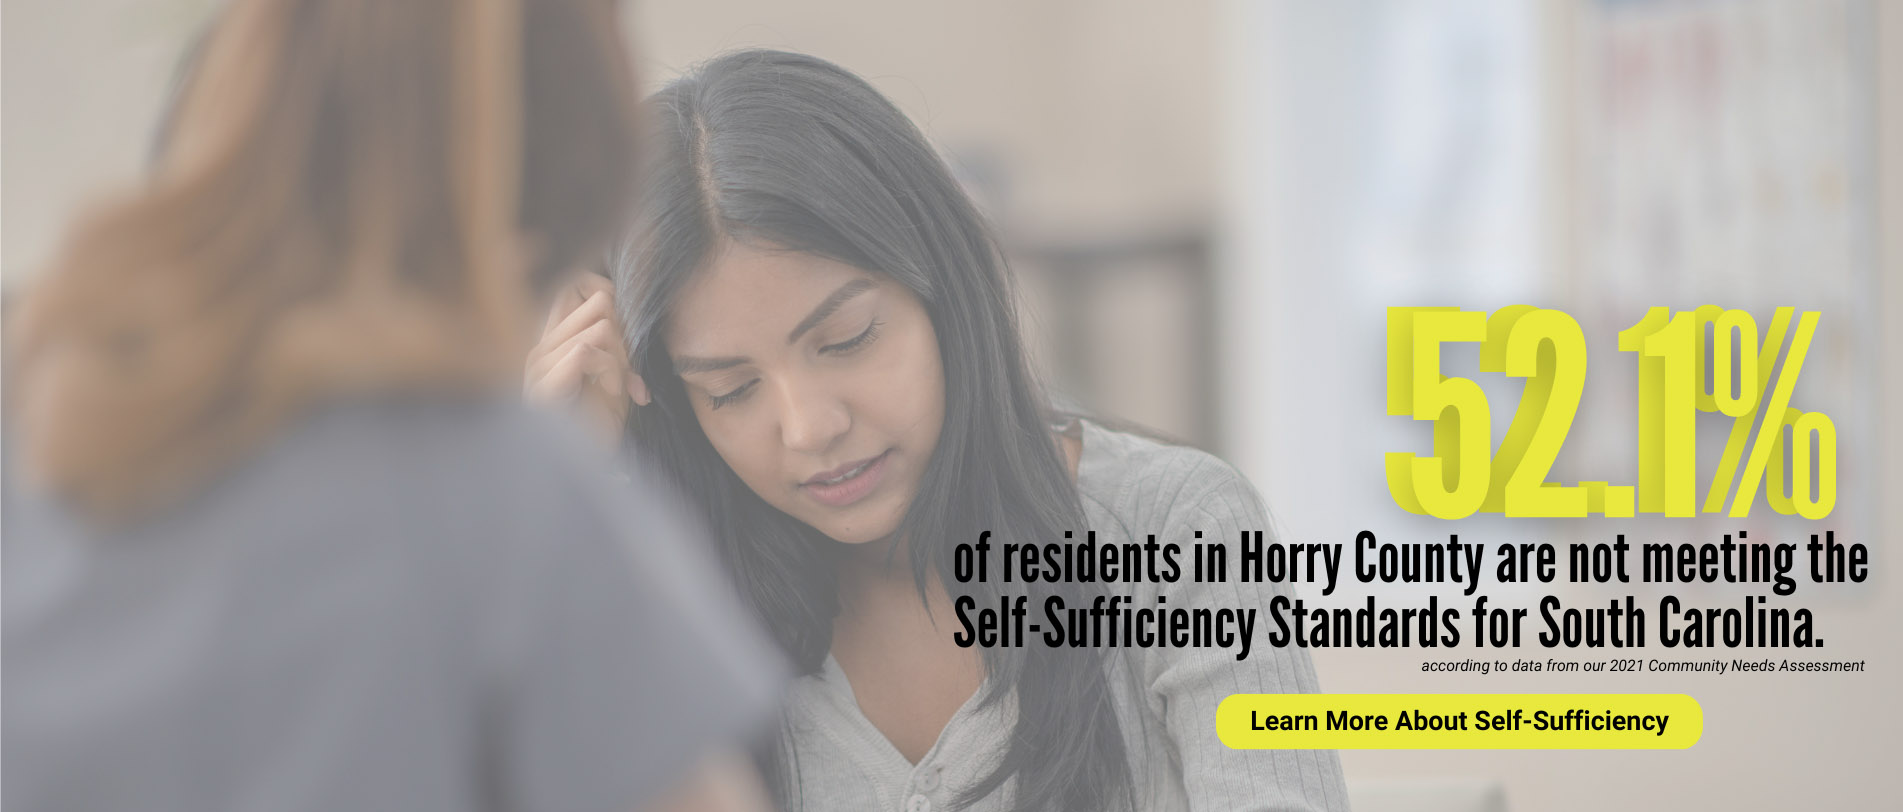 52.1% of residents in Horry County and not meeting the Self-Sufficiency Standards for South Carolina